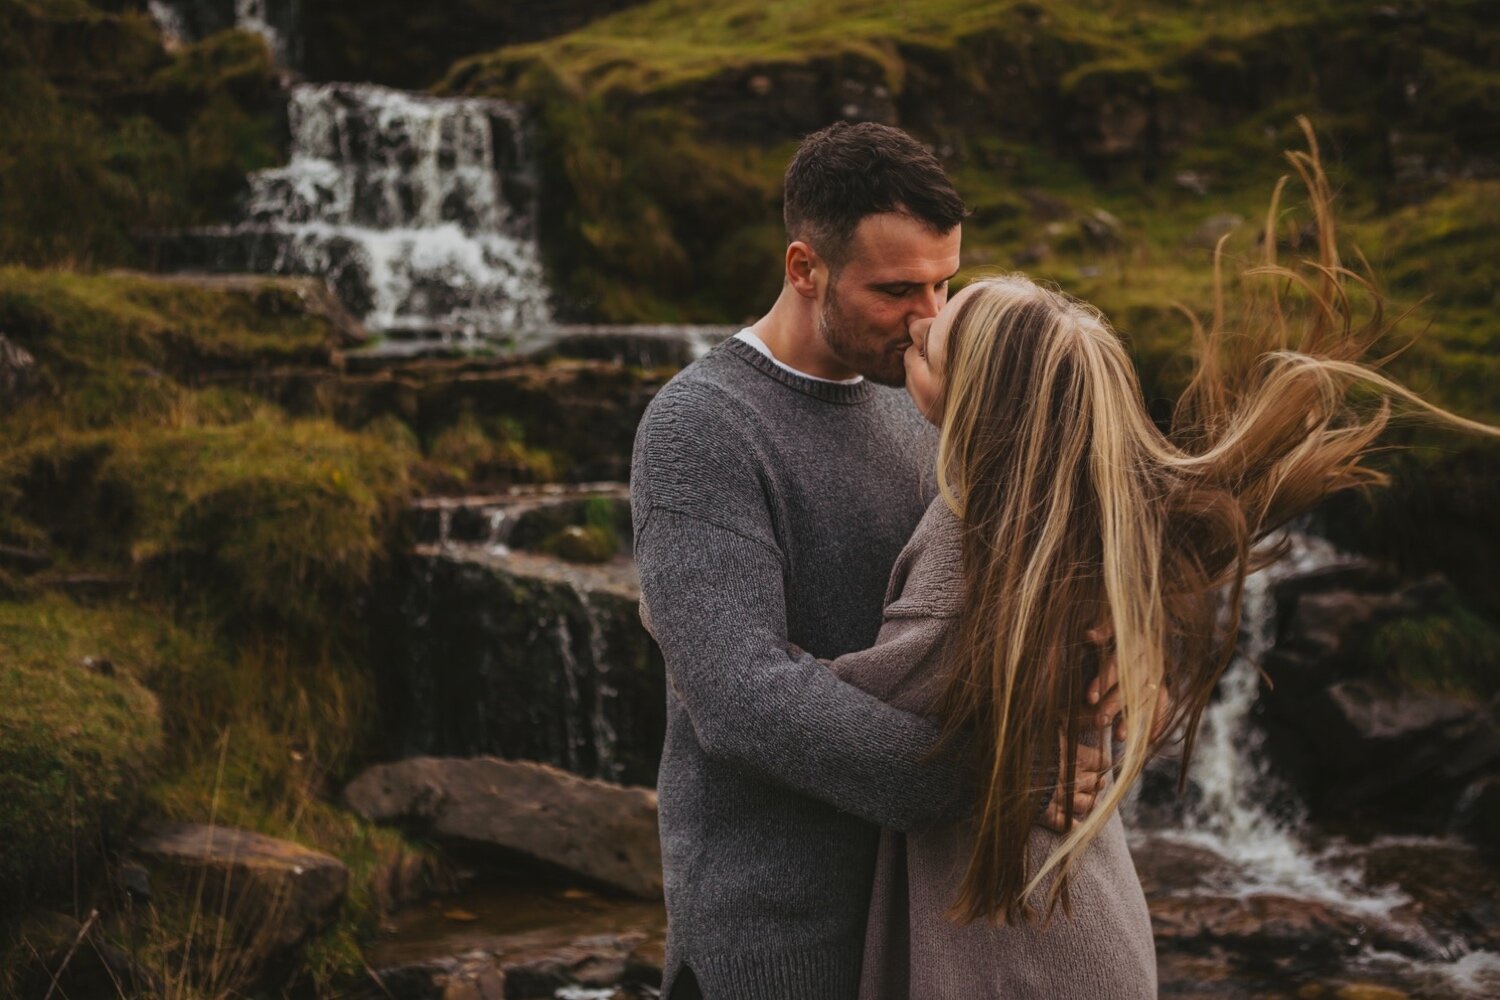 10_TWS-127__grey_dramatic_landscape_alternative_elope_alt_rock_blue_waterfall_winter_flowers_offbeat_dales_waterfalls_autumn_elopement_photography_ribbons_moody_bride_silver_wedding_yorkshire_rainy_cloudy_cosy_weather_photographer_florals_groom.jpg